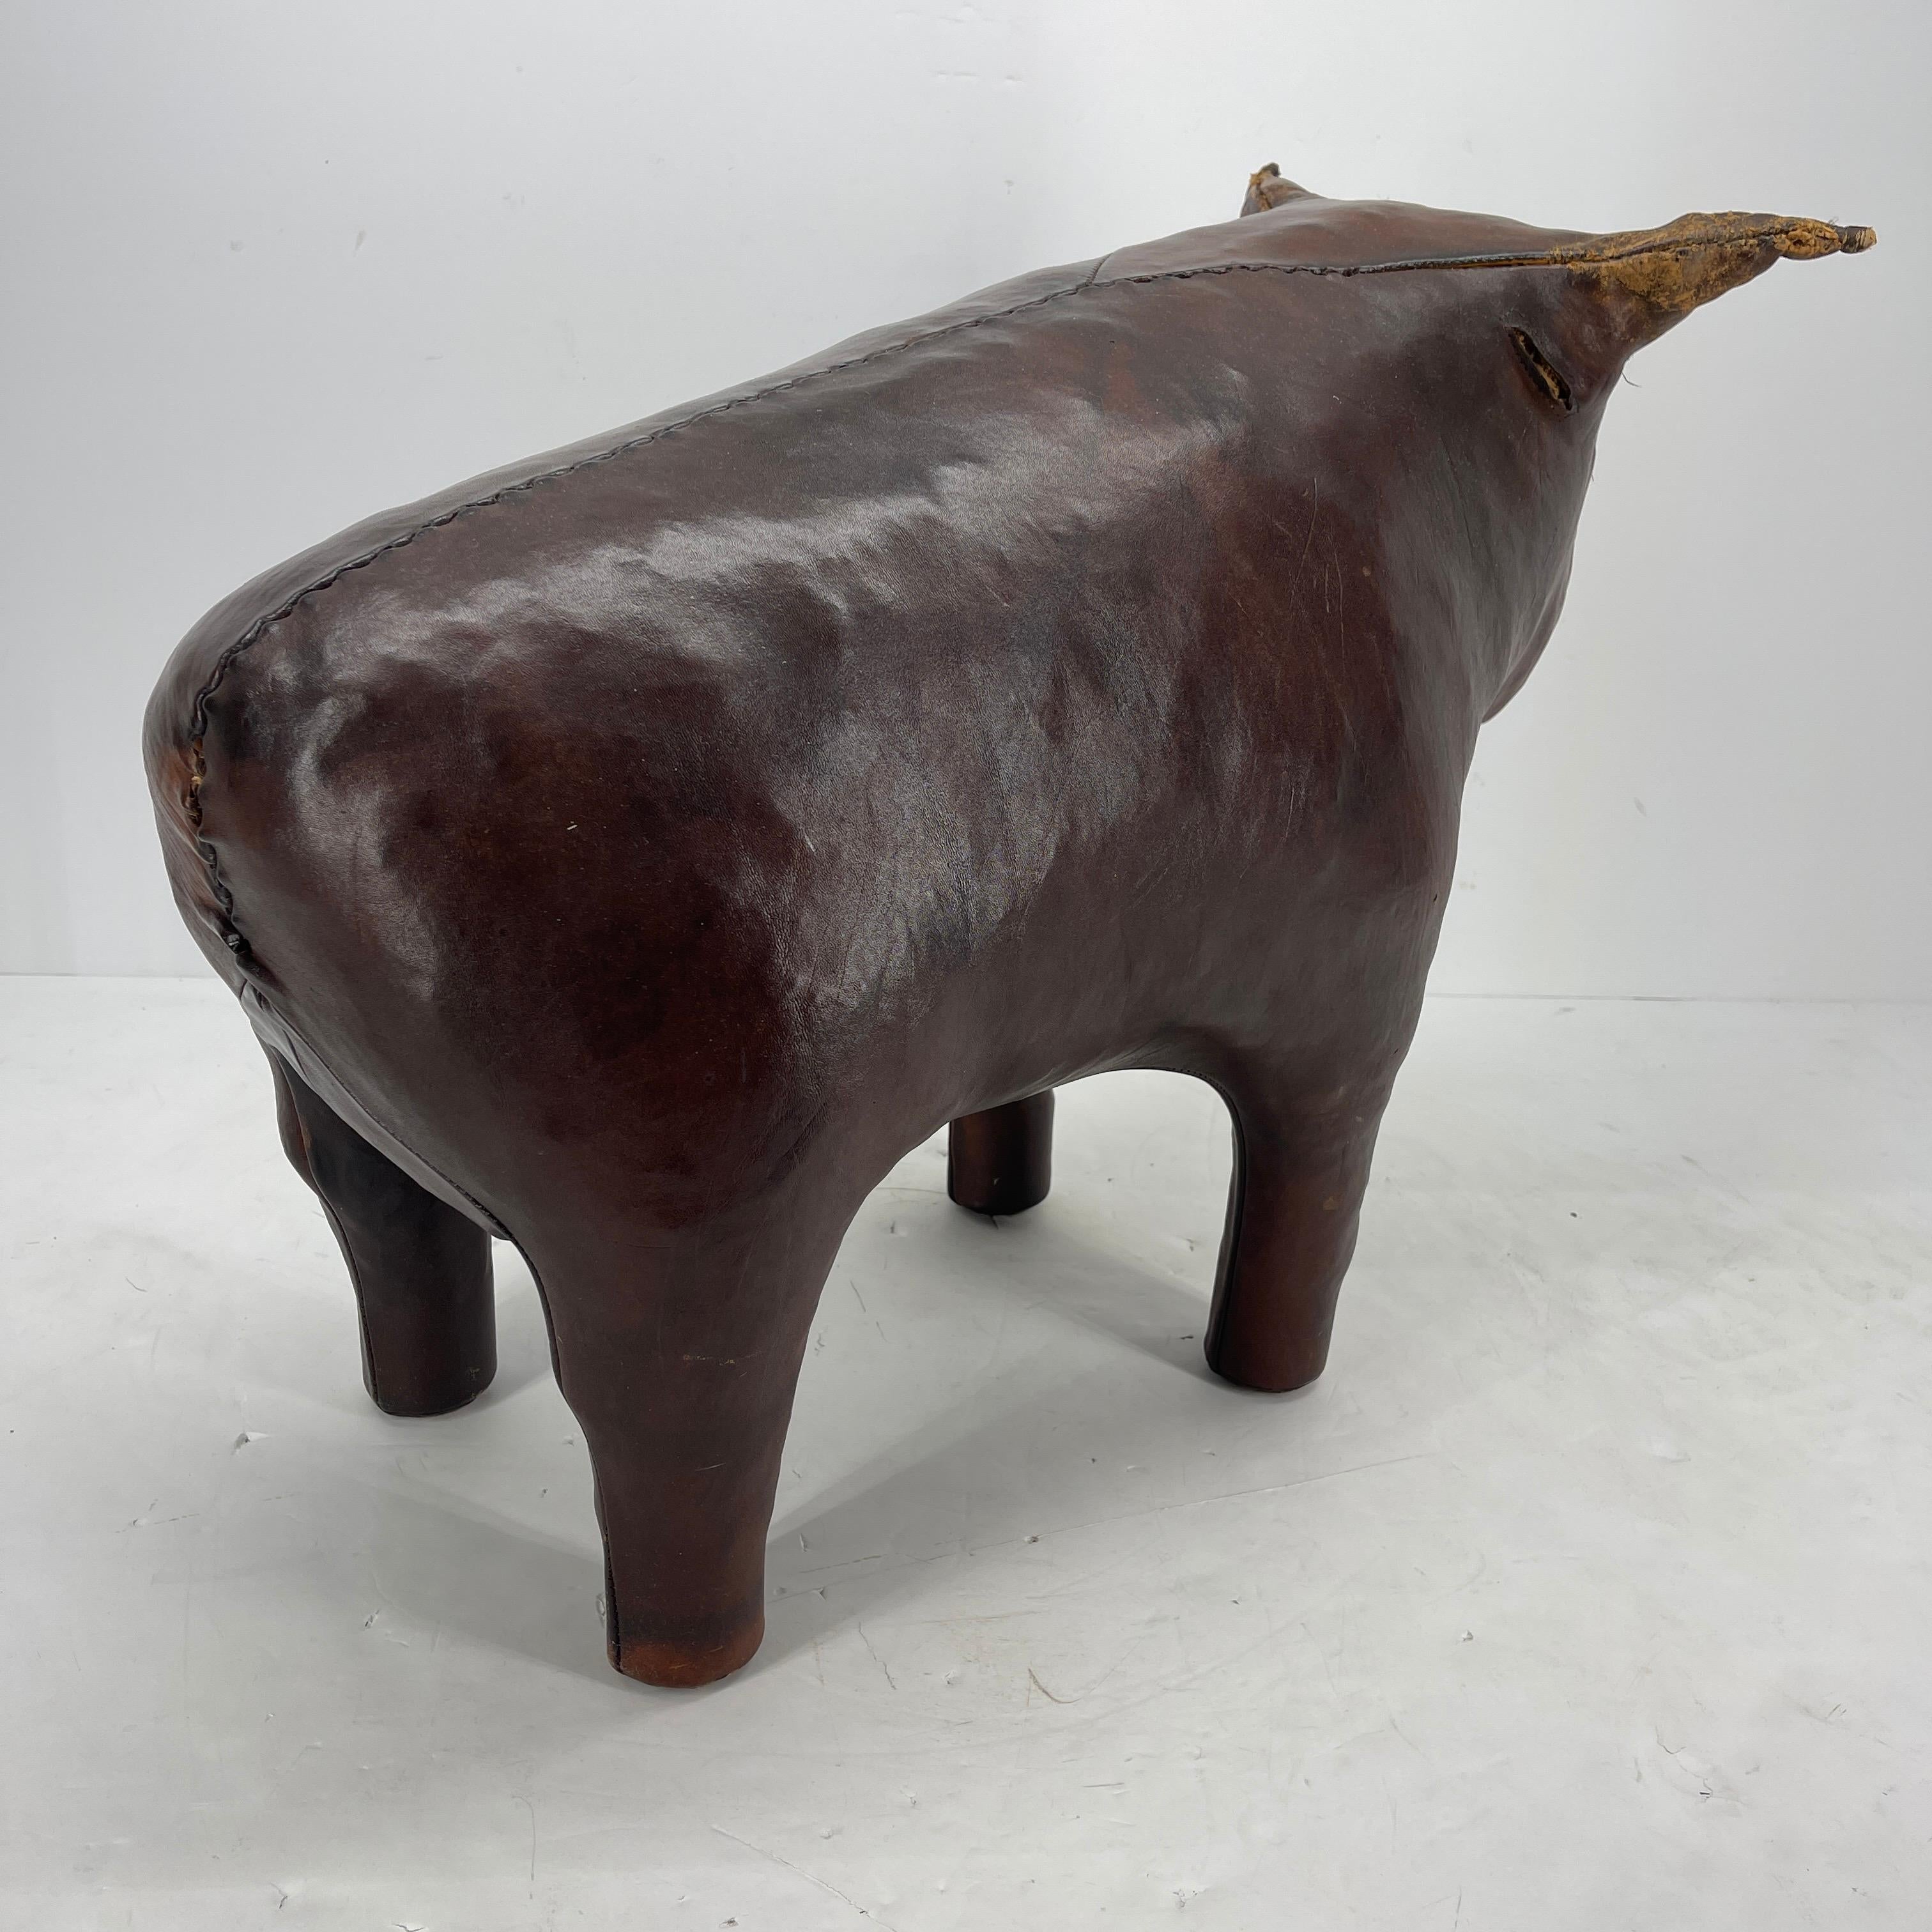 Hand-Crafted Abercrombie & Fitch Leather Bull Statue Footstool, Mid-Century Modern